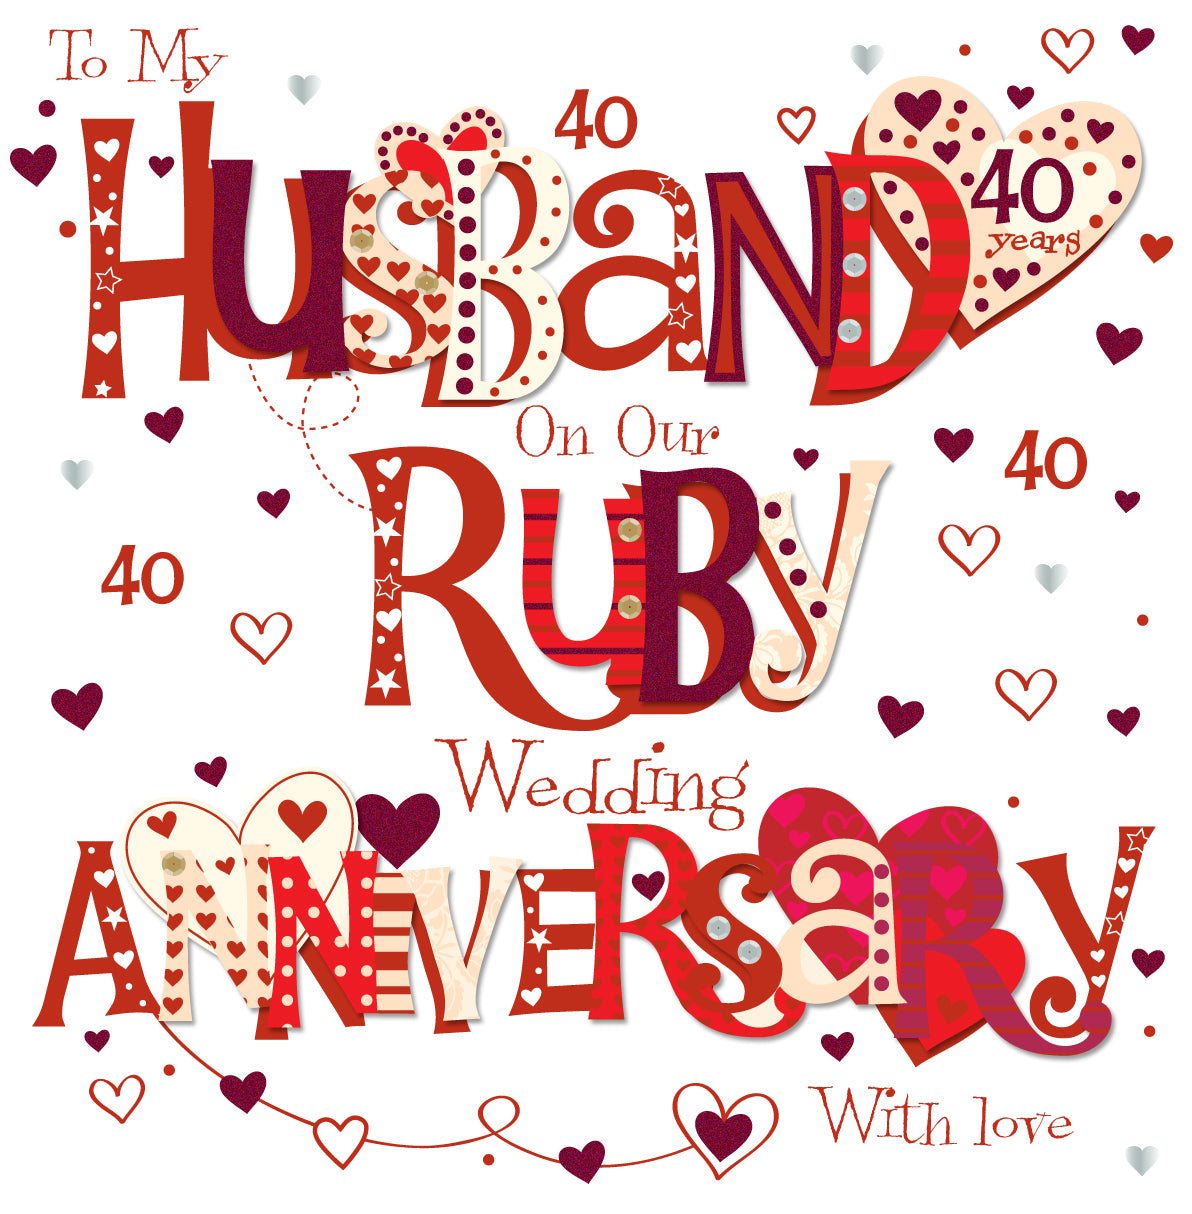 To My Husband on Our 40th Wedding Anniversary Card